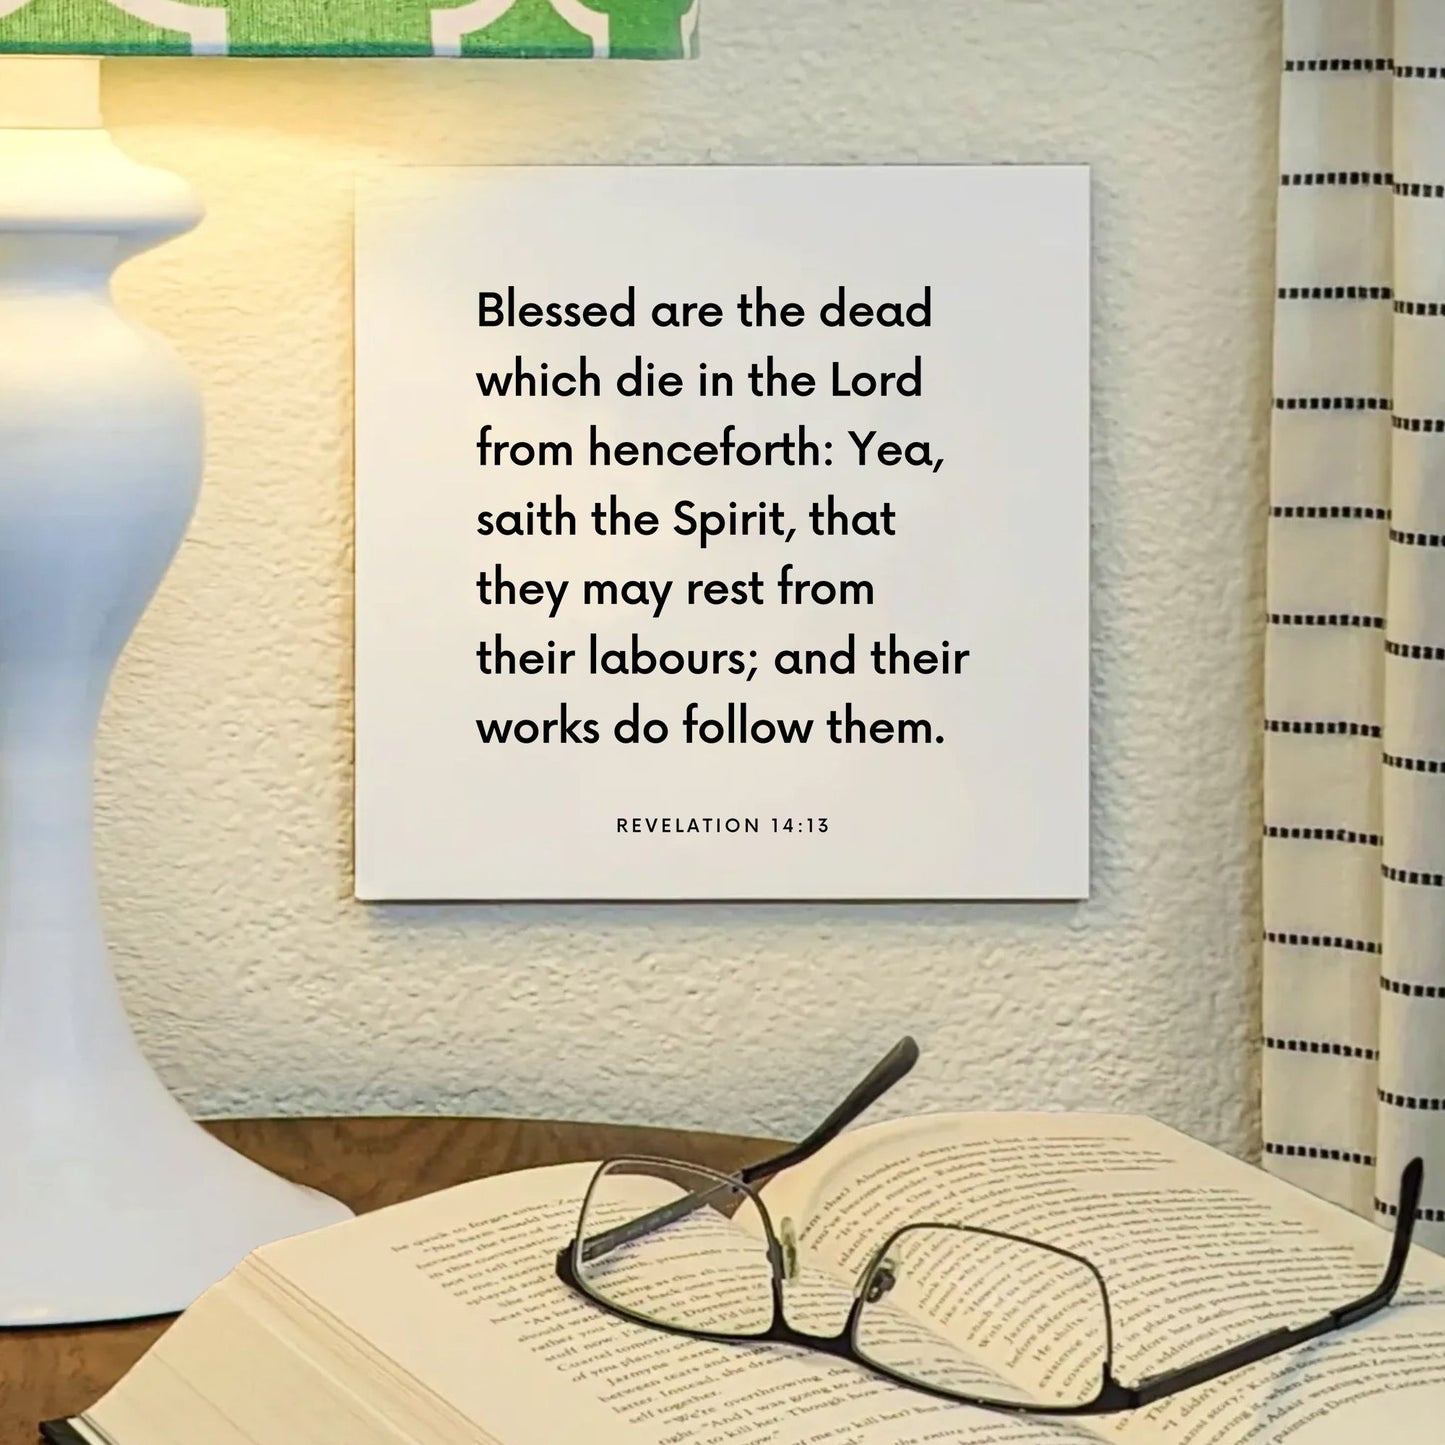 Lamp mouting of the scripture tile for Revelation 14:13 - "Blessed are the dead which die in the Lord"